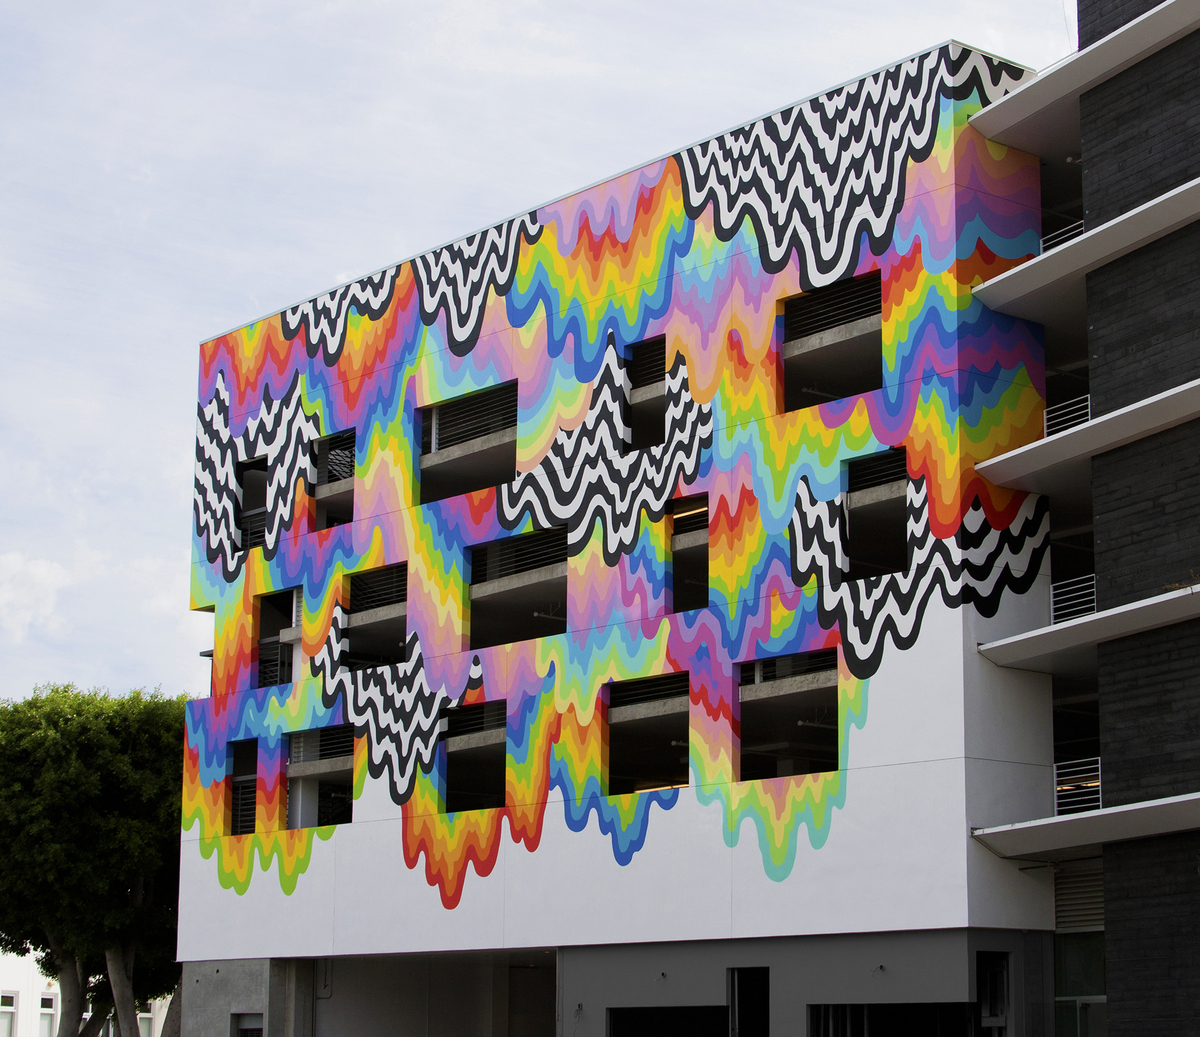 Technicolor Ooze, 2015, latex paint, approx, 45 x 65 ft Mural located at the Platform in Culver City, CA